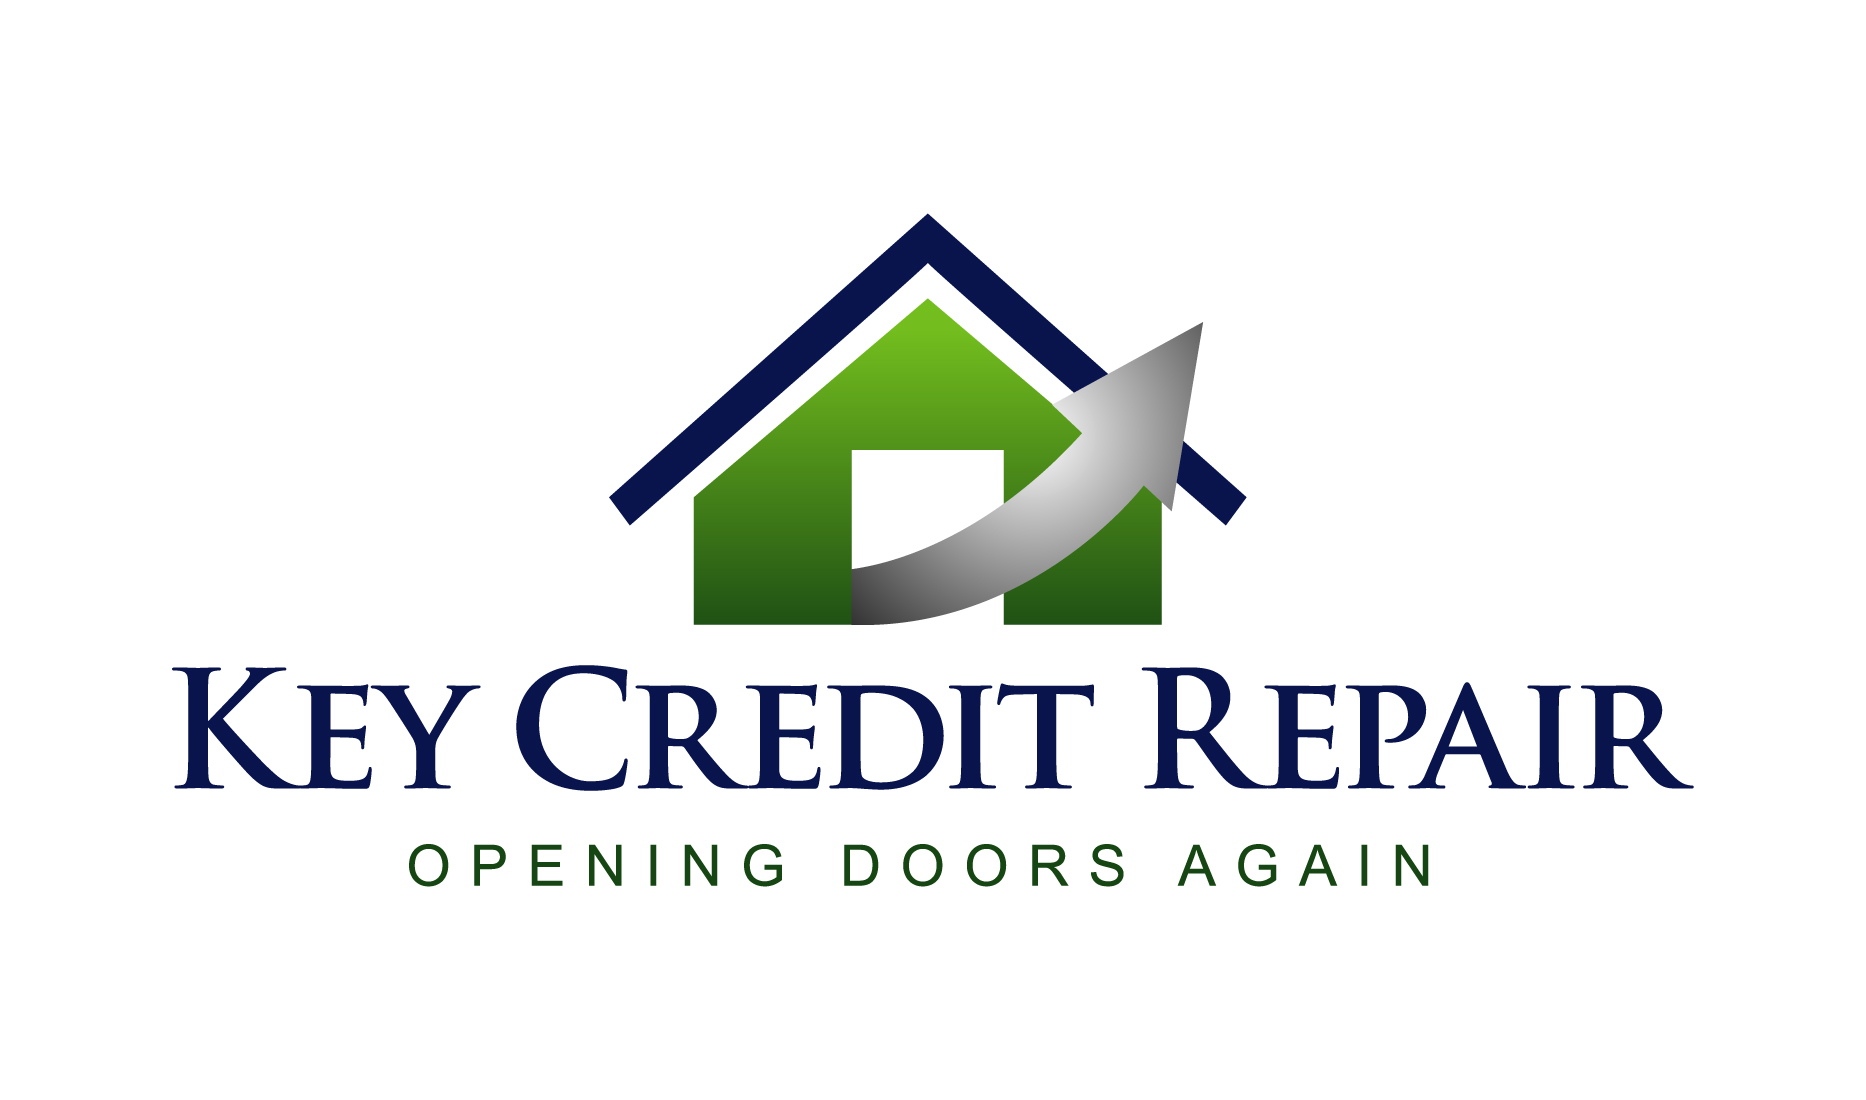 Credit Repair Companies Are They Worth the Cost?